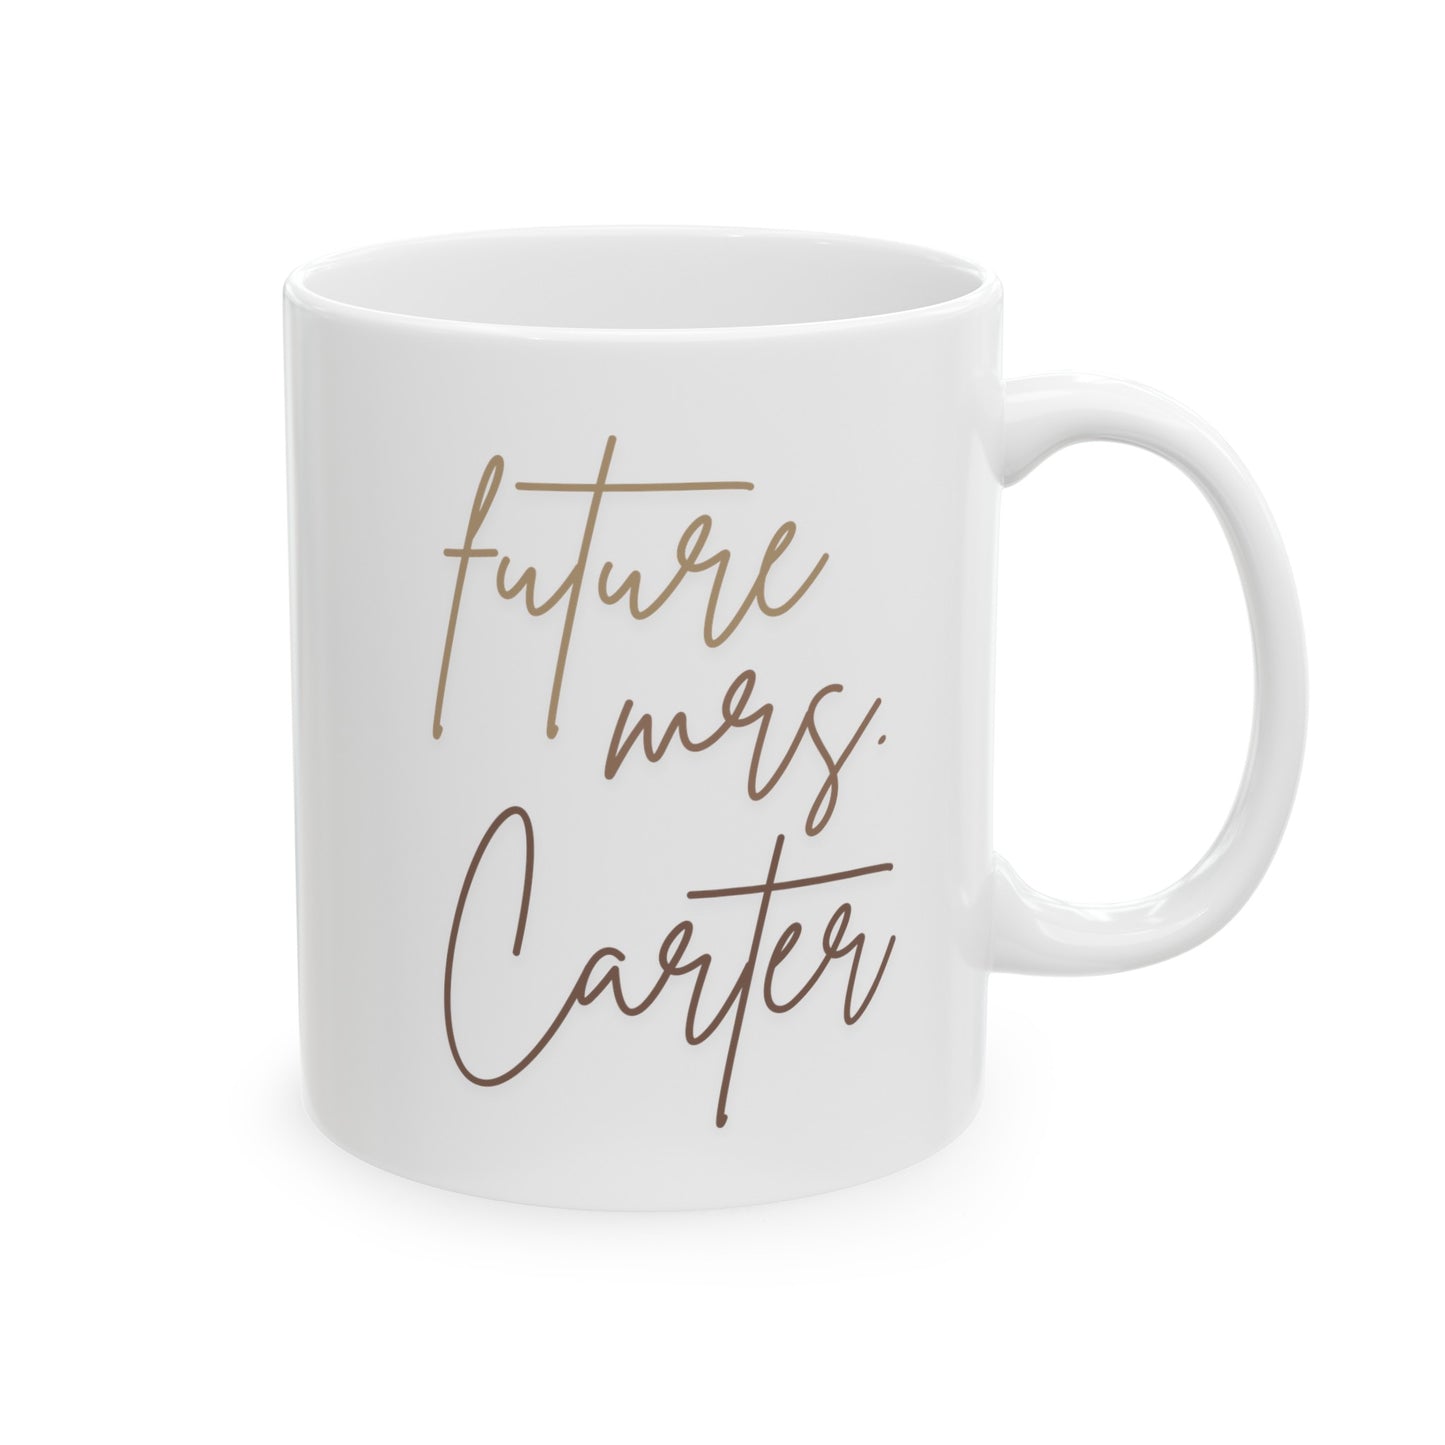 Personalized Future Mrs 11oz white funny coffee mug tea cup gift for bride to be engagement engaged custom name customized waveywares wavey wares wavywares wavy wares